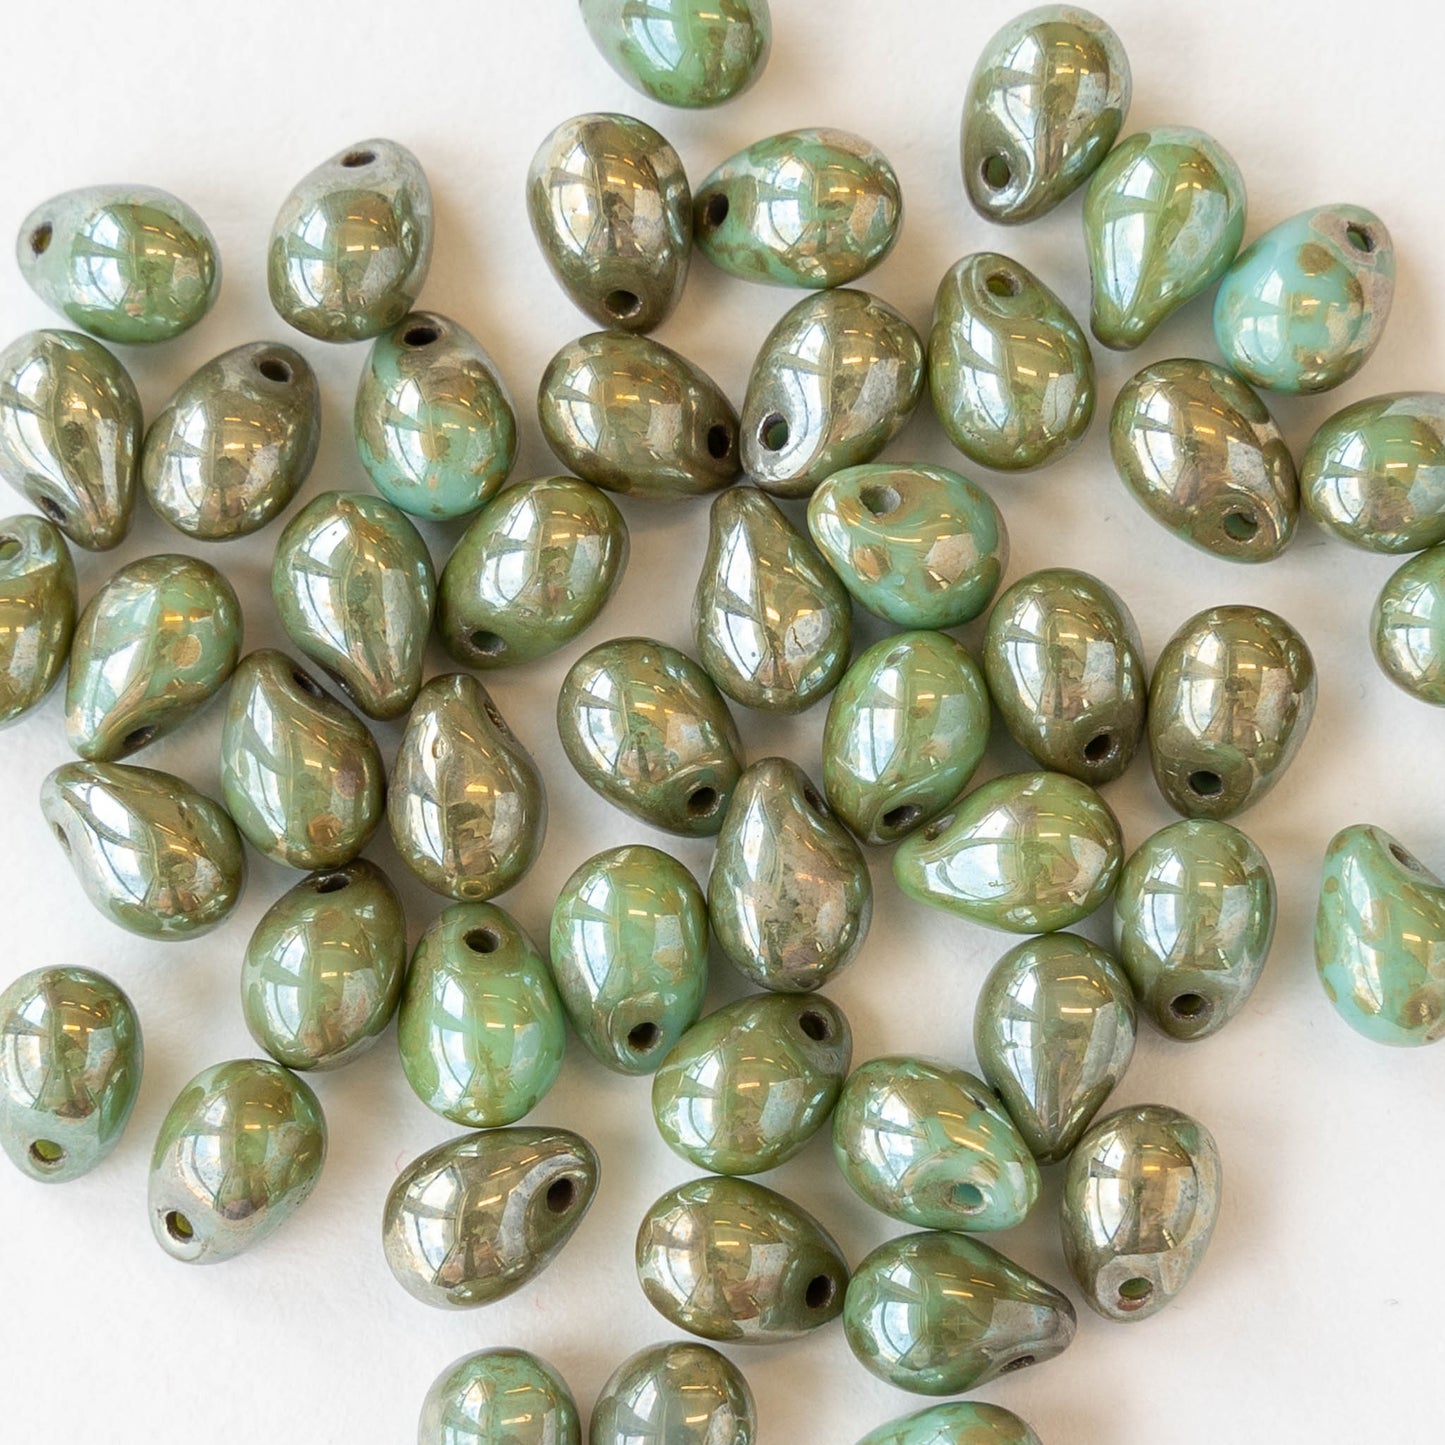 5x7mm Glass Teardrop Beads - Light Turquoise Picasso - 50 Beads